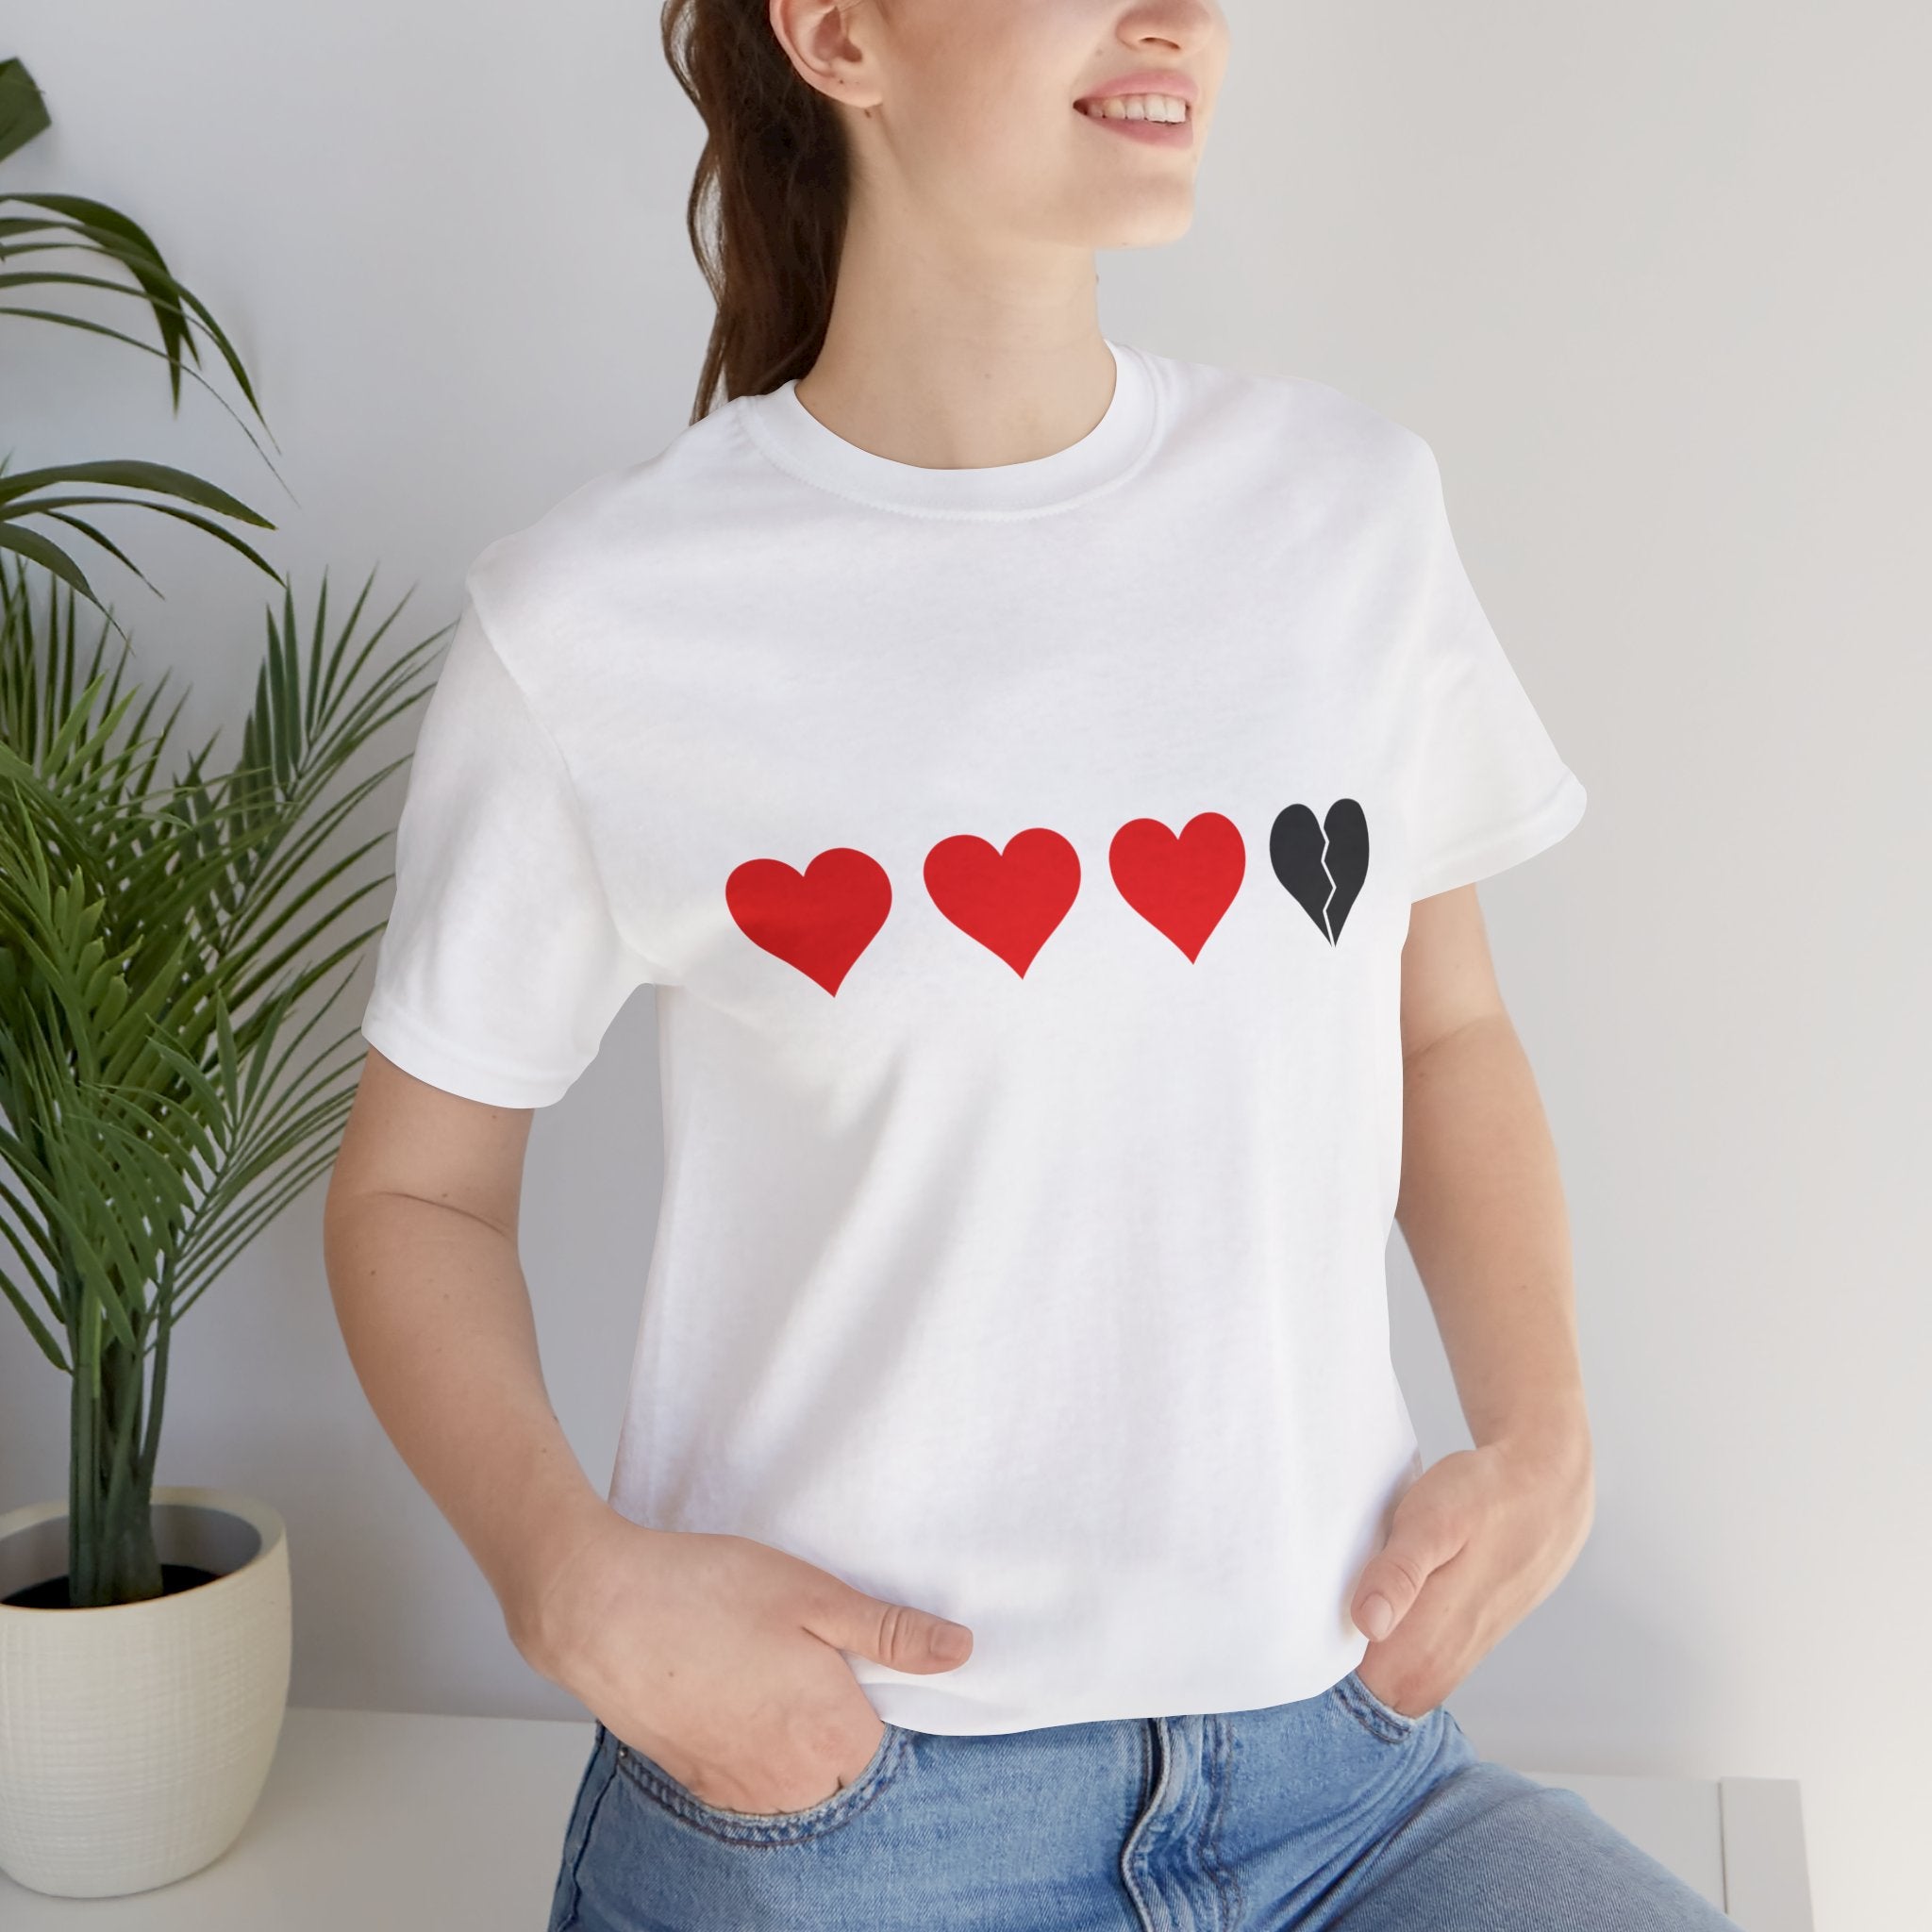 One in Four - Soft Cotton Adult Unisex T-Shirt, Gift for friends and family by clothezy.com - Buy Now